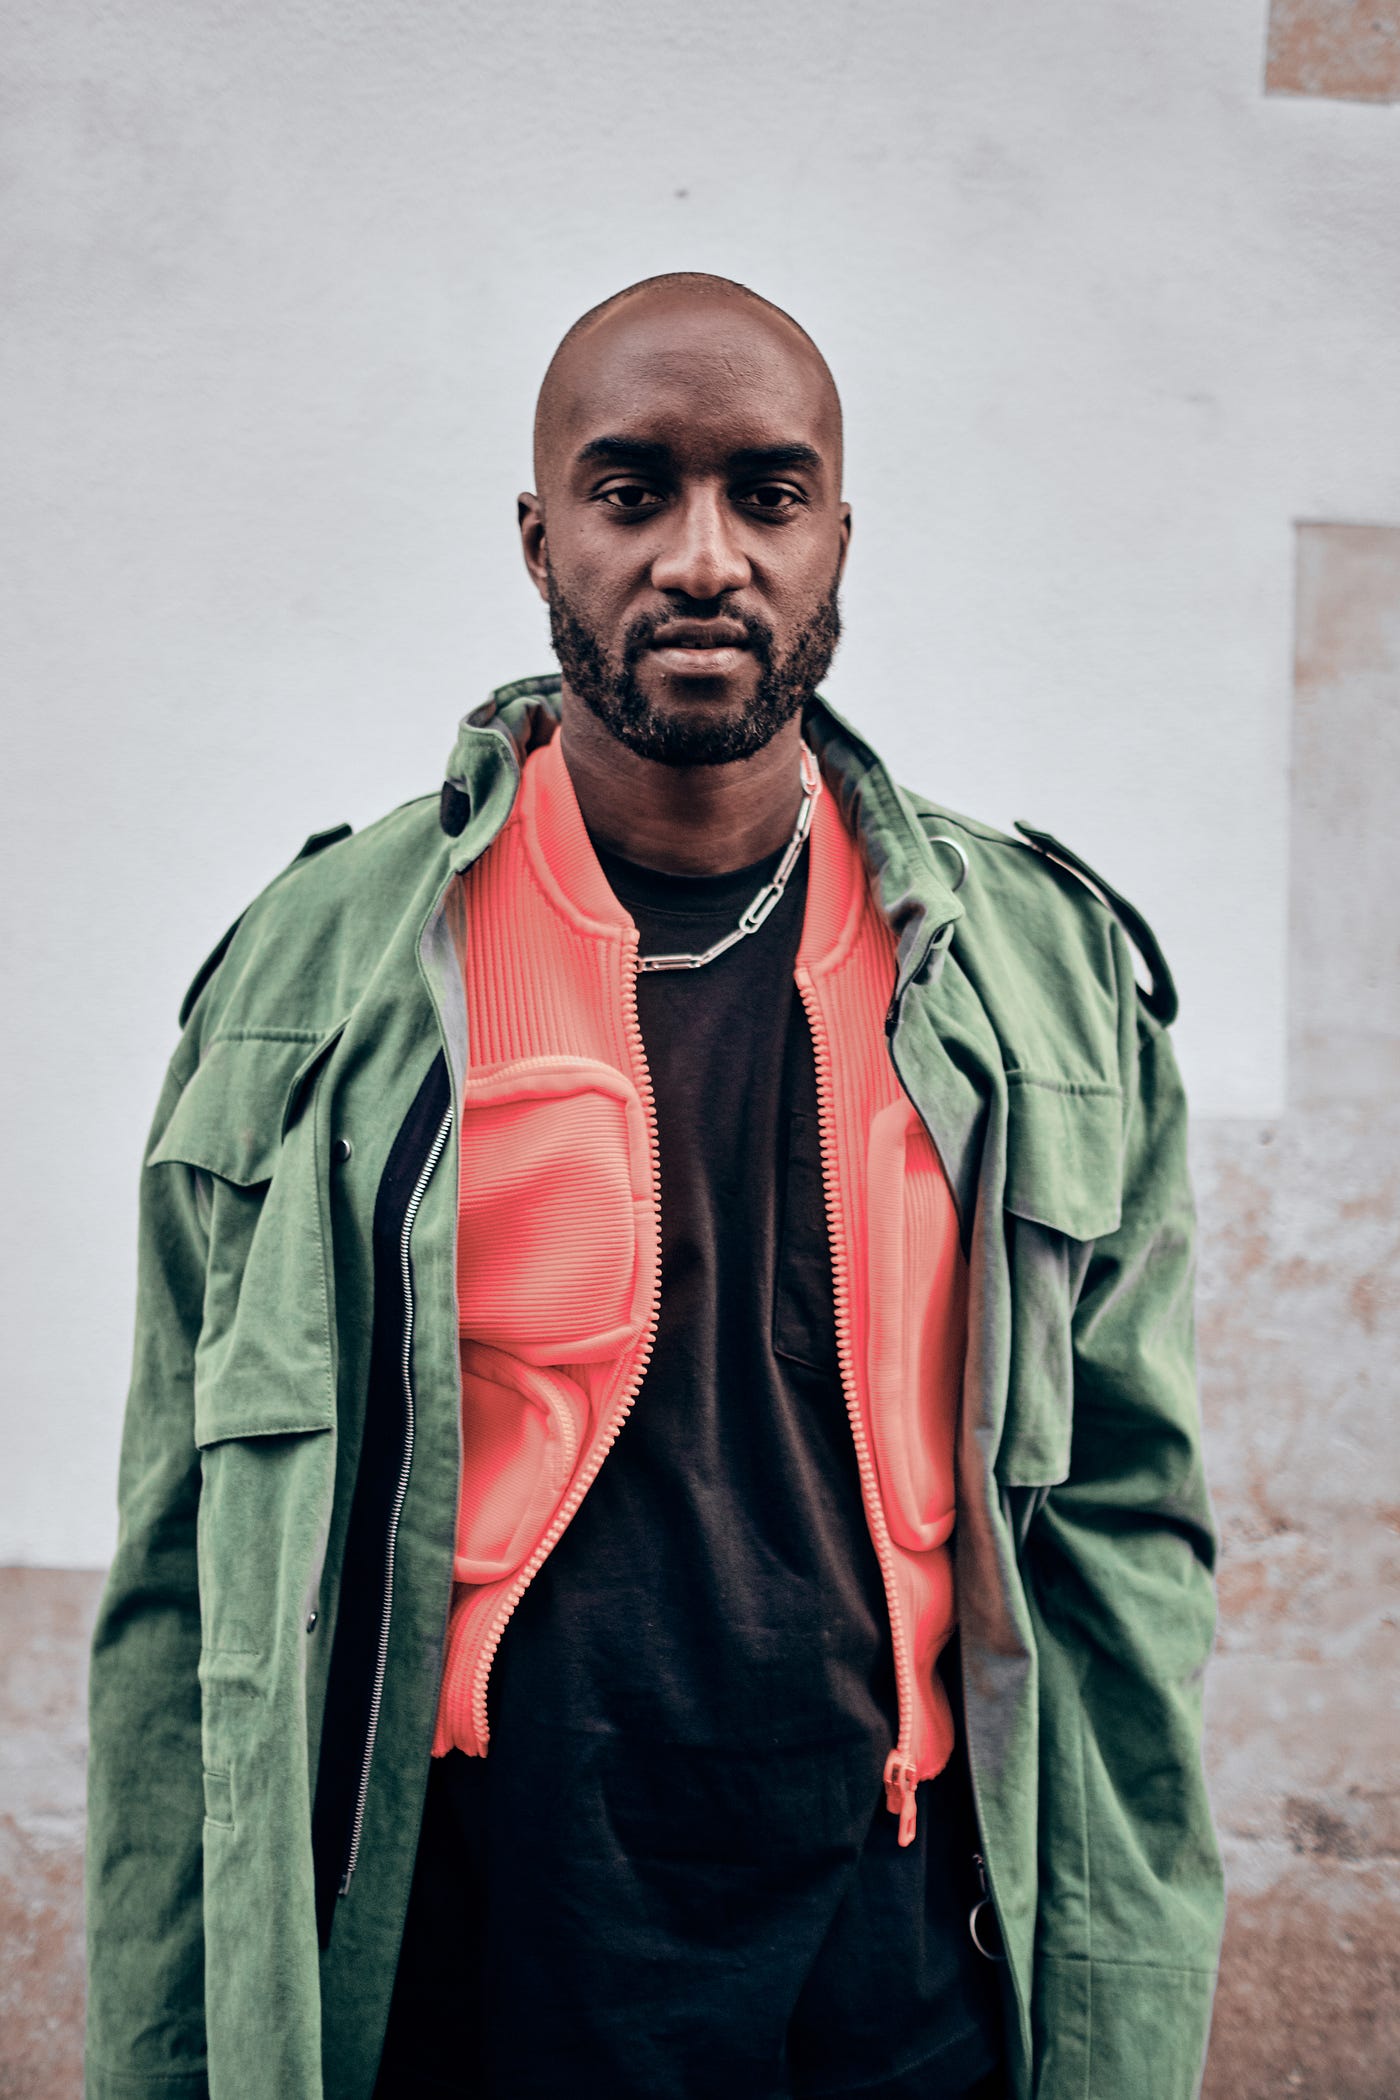 Off-white founder Virgil Abloh has declared the end of streetwear